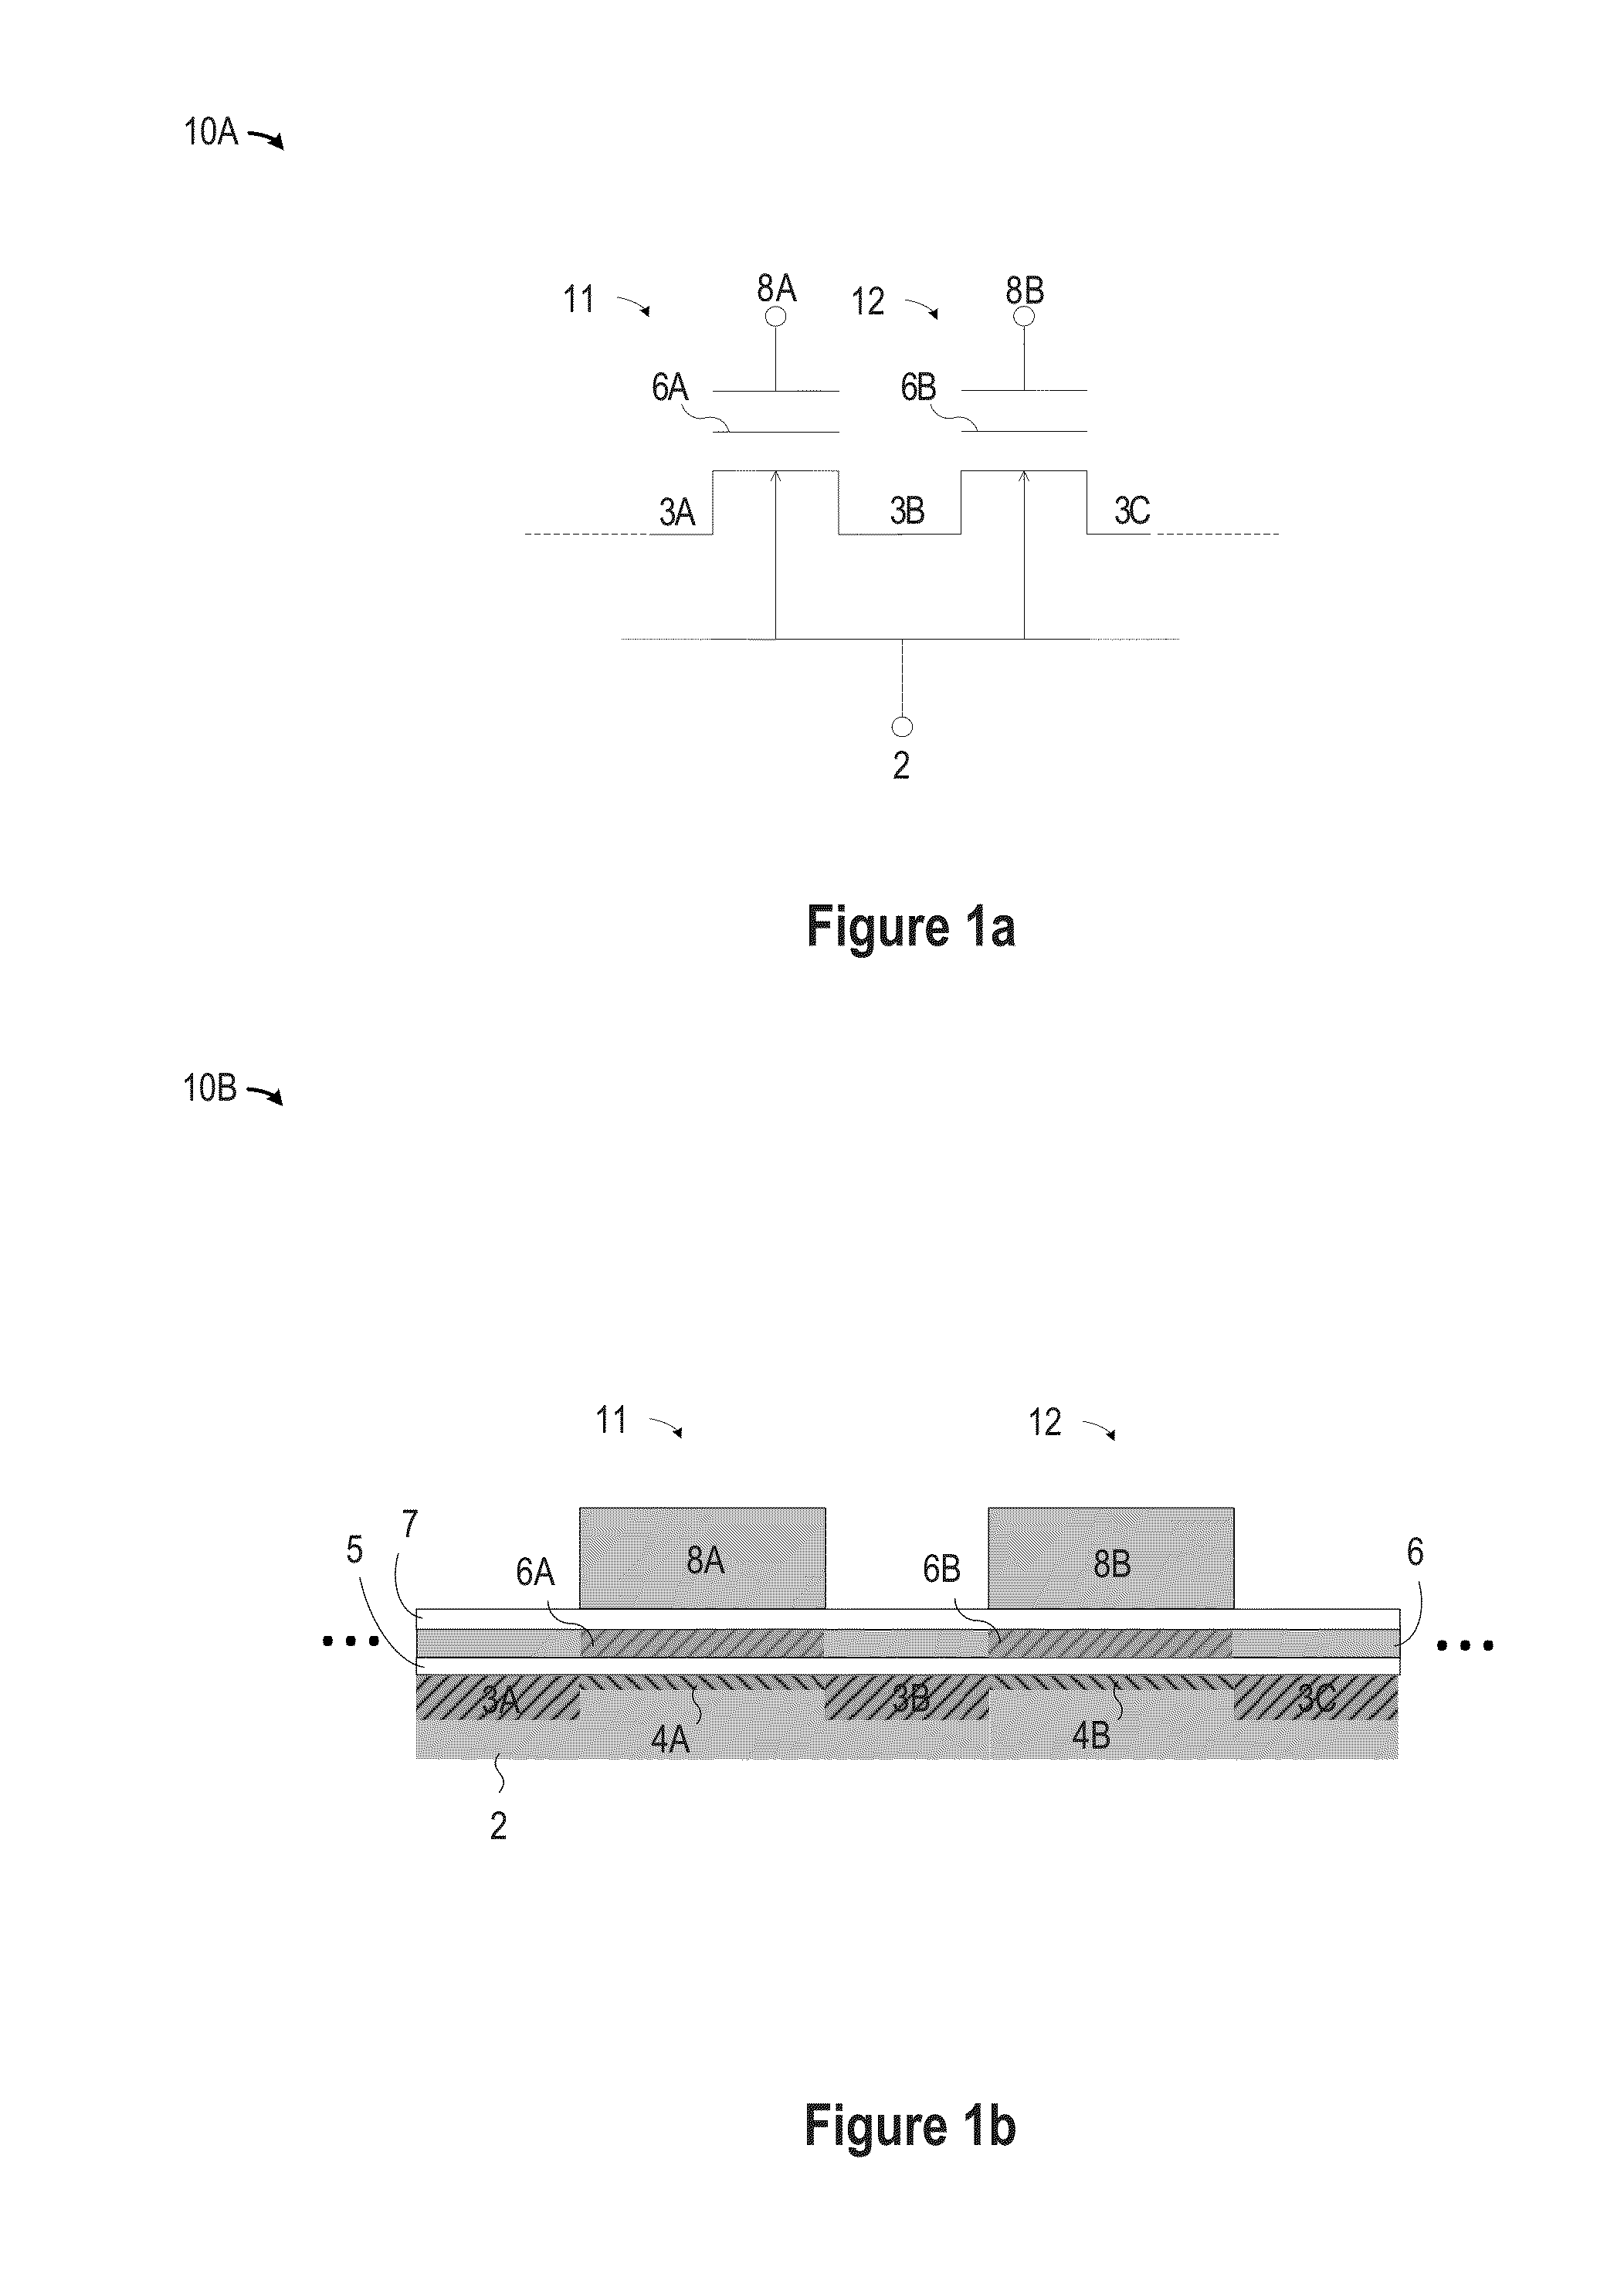 Access Transistor of a Nonvolatile Memory Device and Method for Fabricating Same